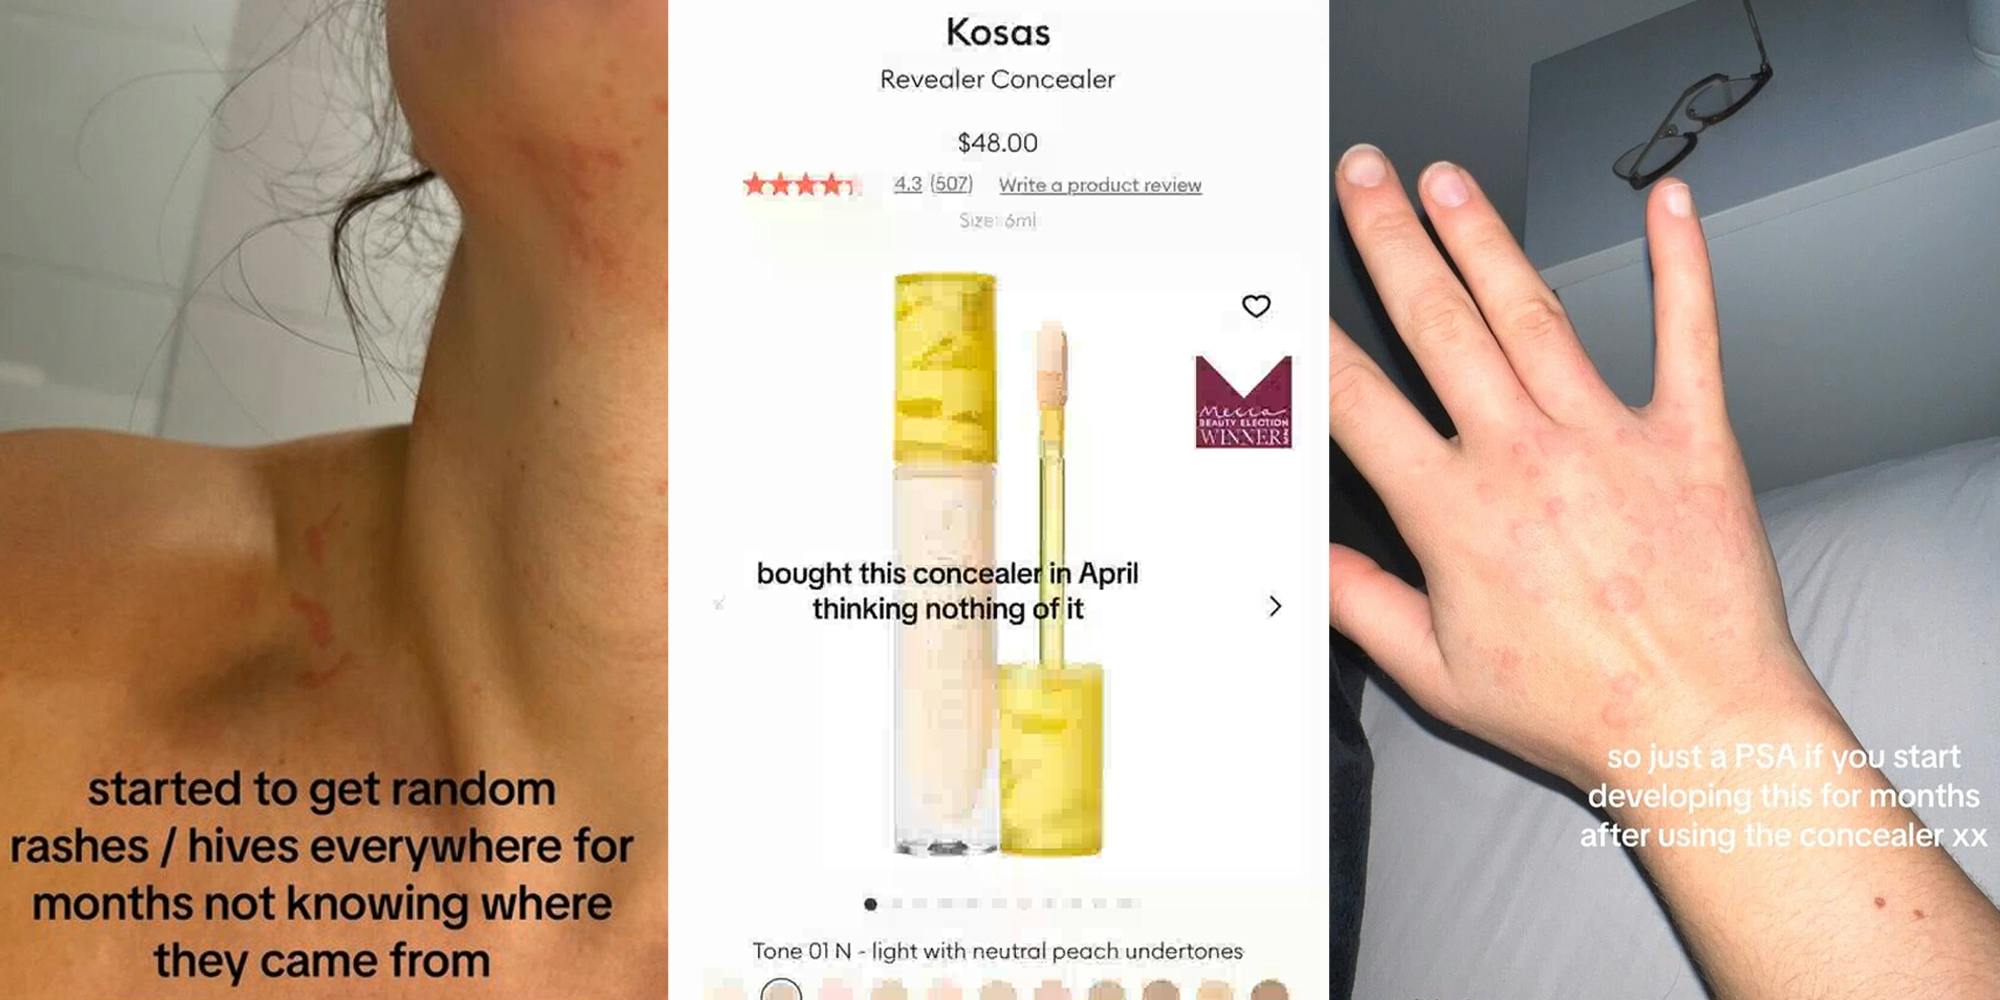 woman with rash with caption "started to get random rashes/hives everywhere for months not knowing where they came from" (l) Kosas concealer on website with caption "bought this concealer in April thinking nothing of it" (c) hand with rash with caption "so just a PSA if you start developing this for months after using concealer" (r)